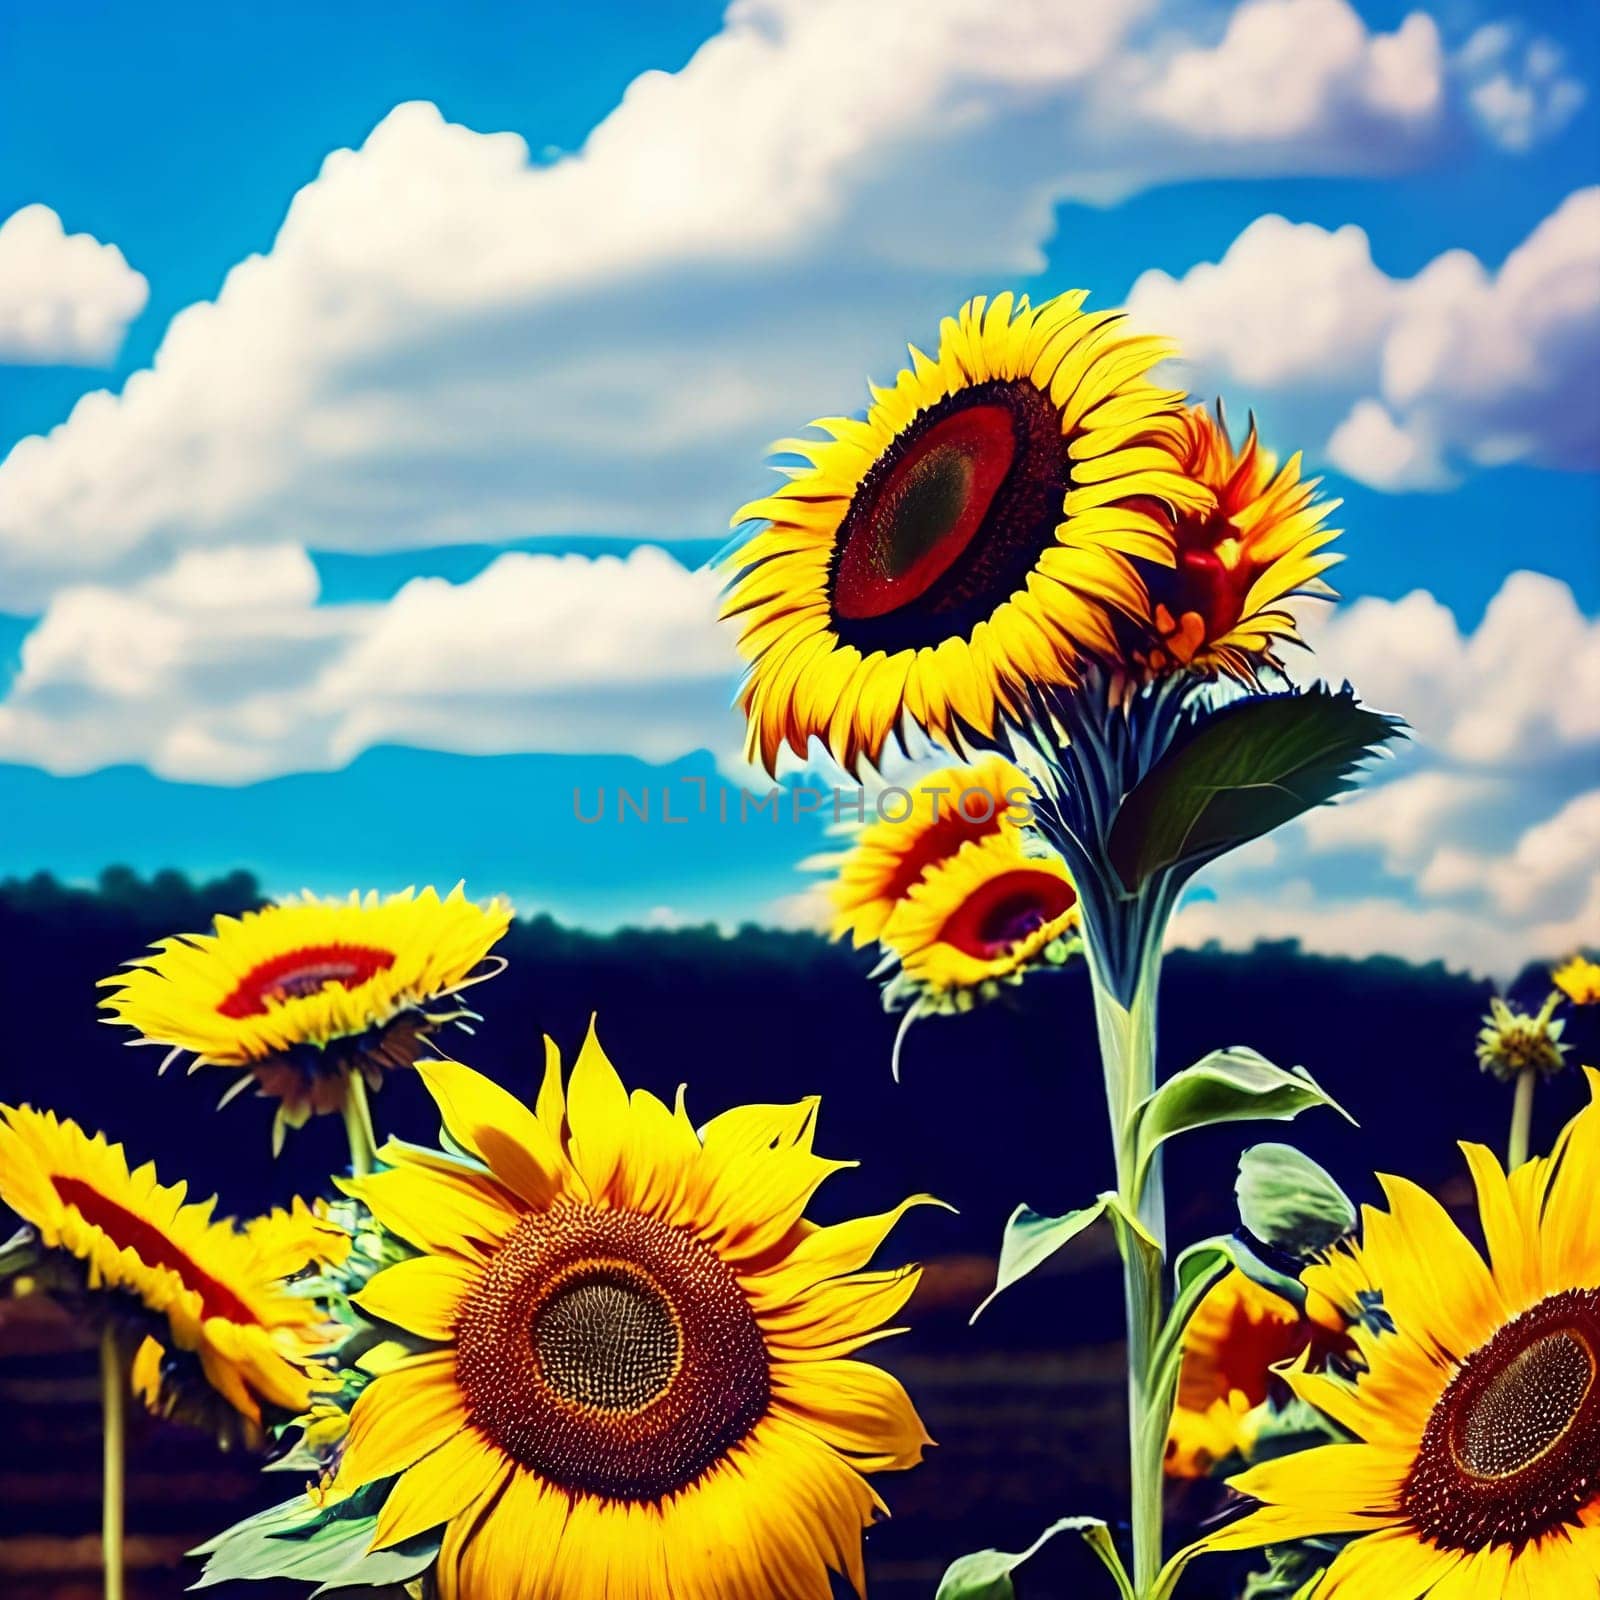 Captivating summer backdrop with a mix of sunflowers and daisies. by GoodOlga